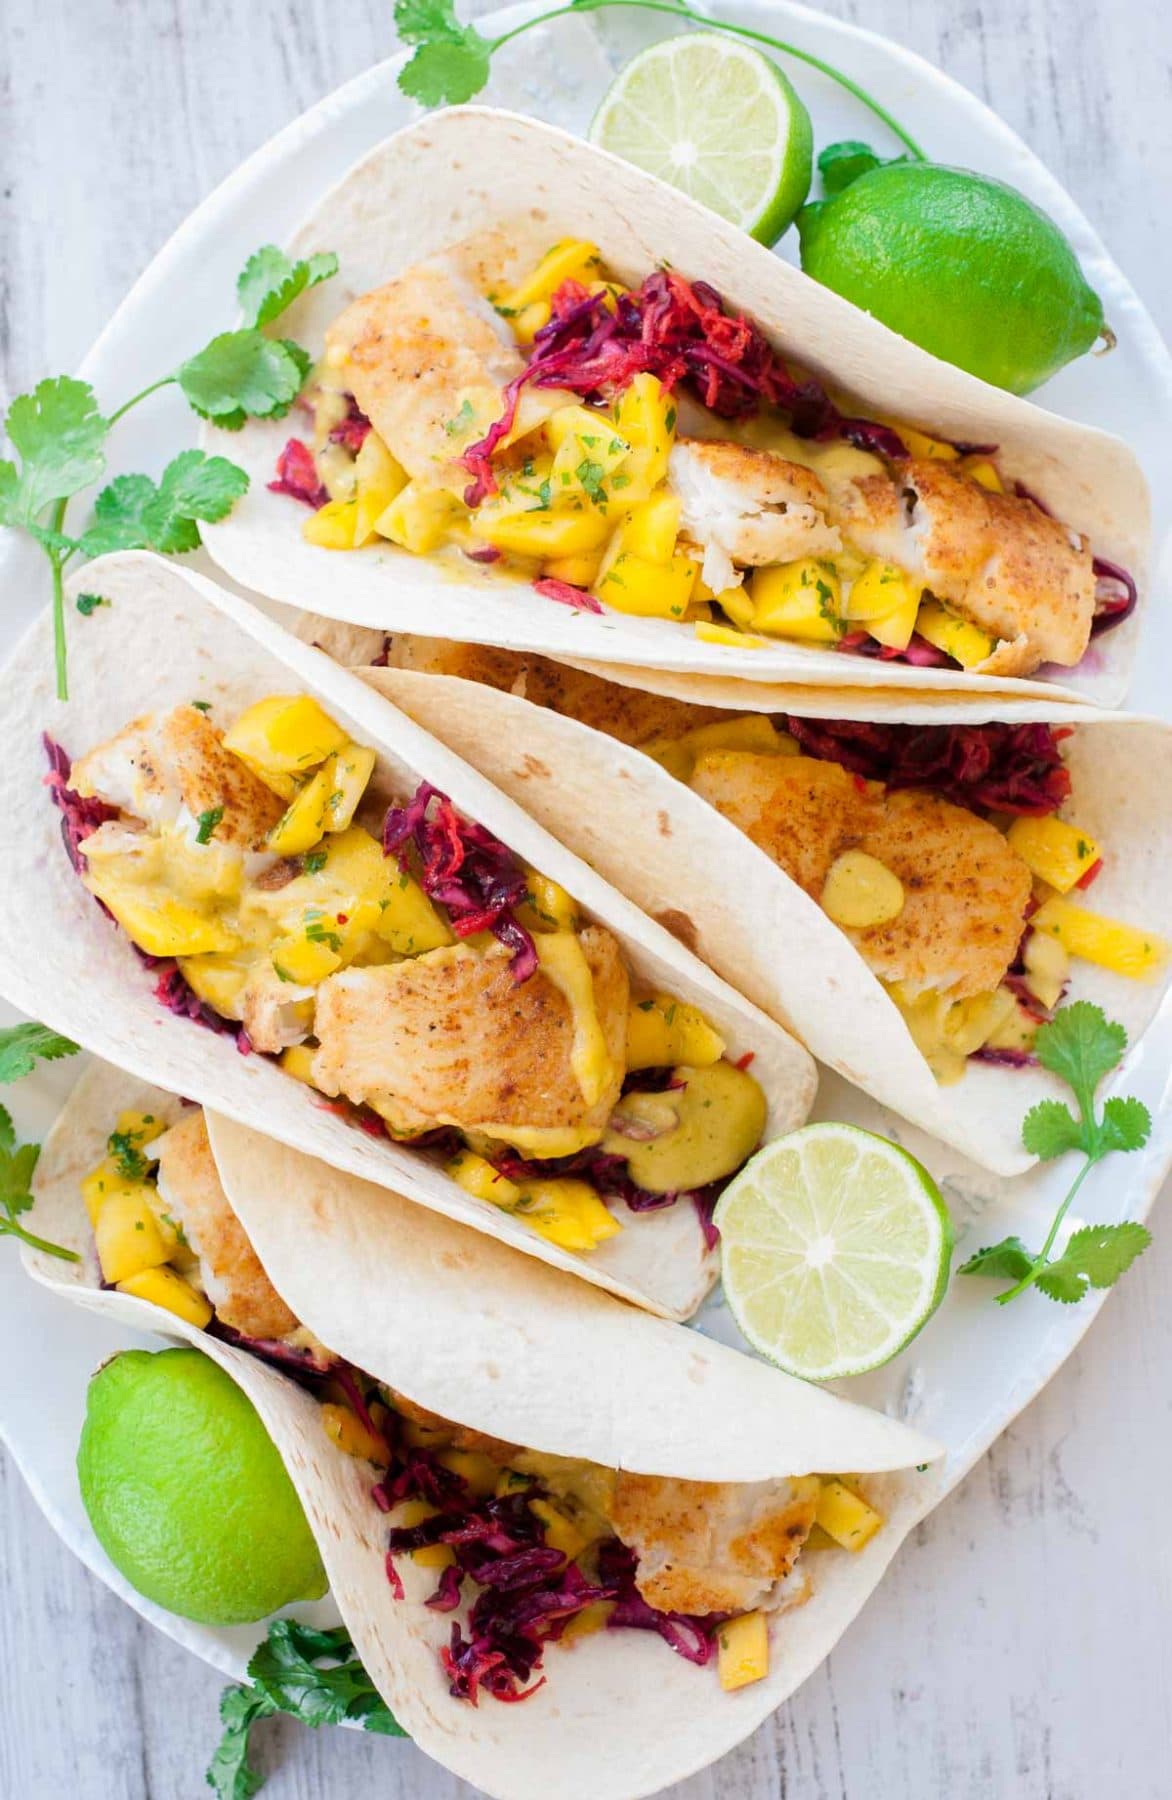 Fish tacos with mango salsa, mango sauce and red cabbage carrot slaw.